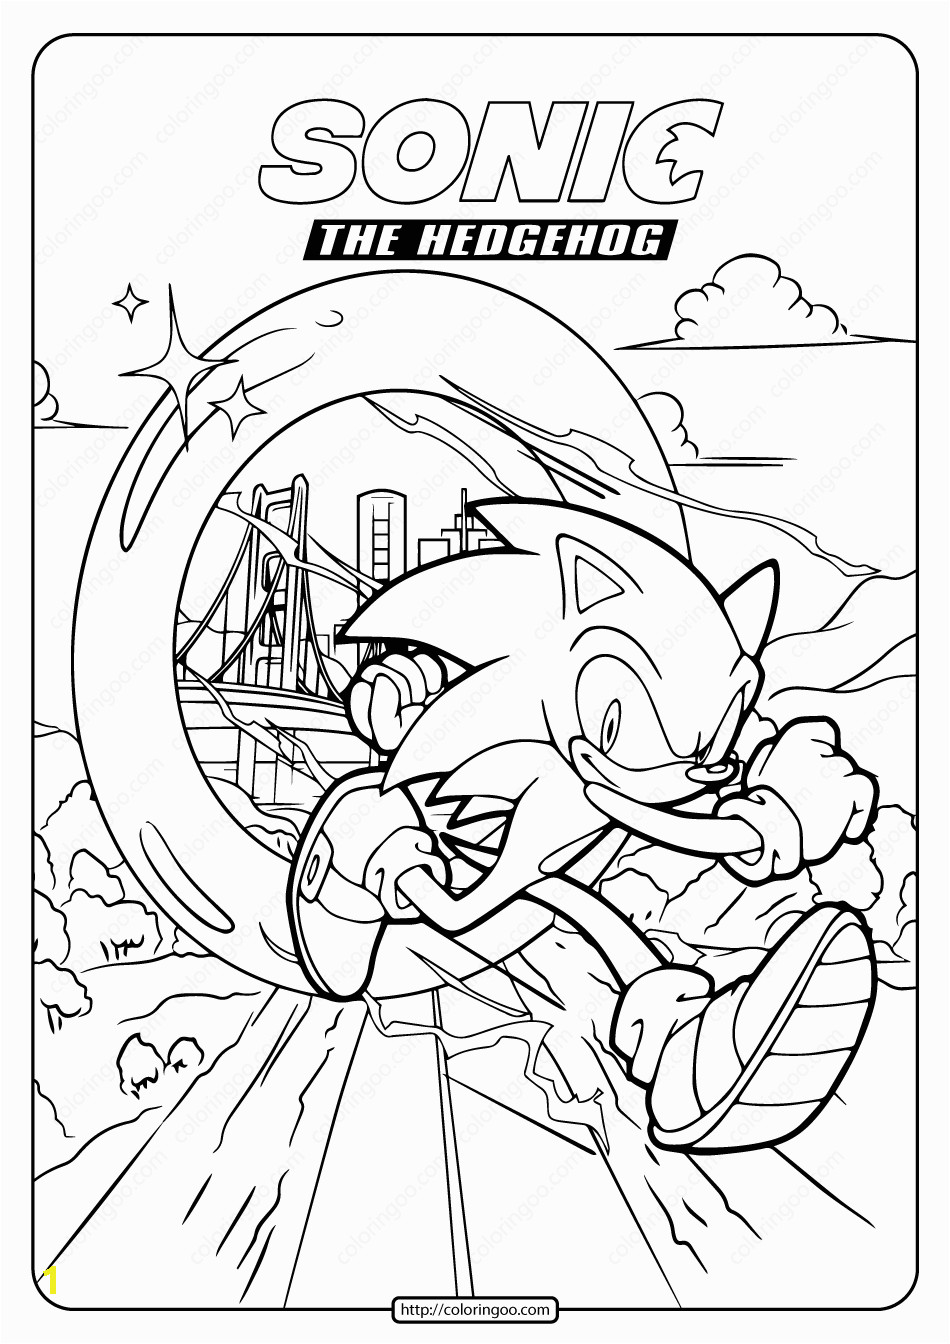 Sonic the Hedgehog Coloring Pages Pdf sonic the Hedgehog Printable Pdf Coloring Pages